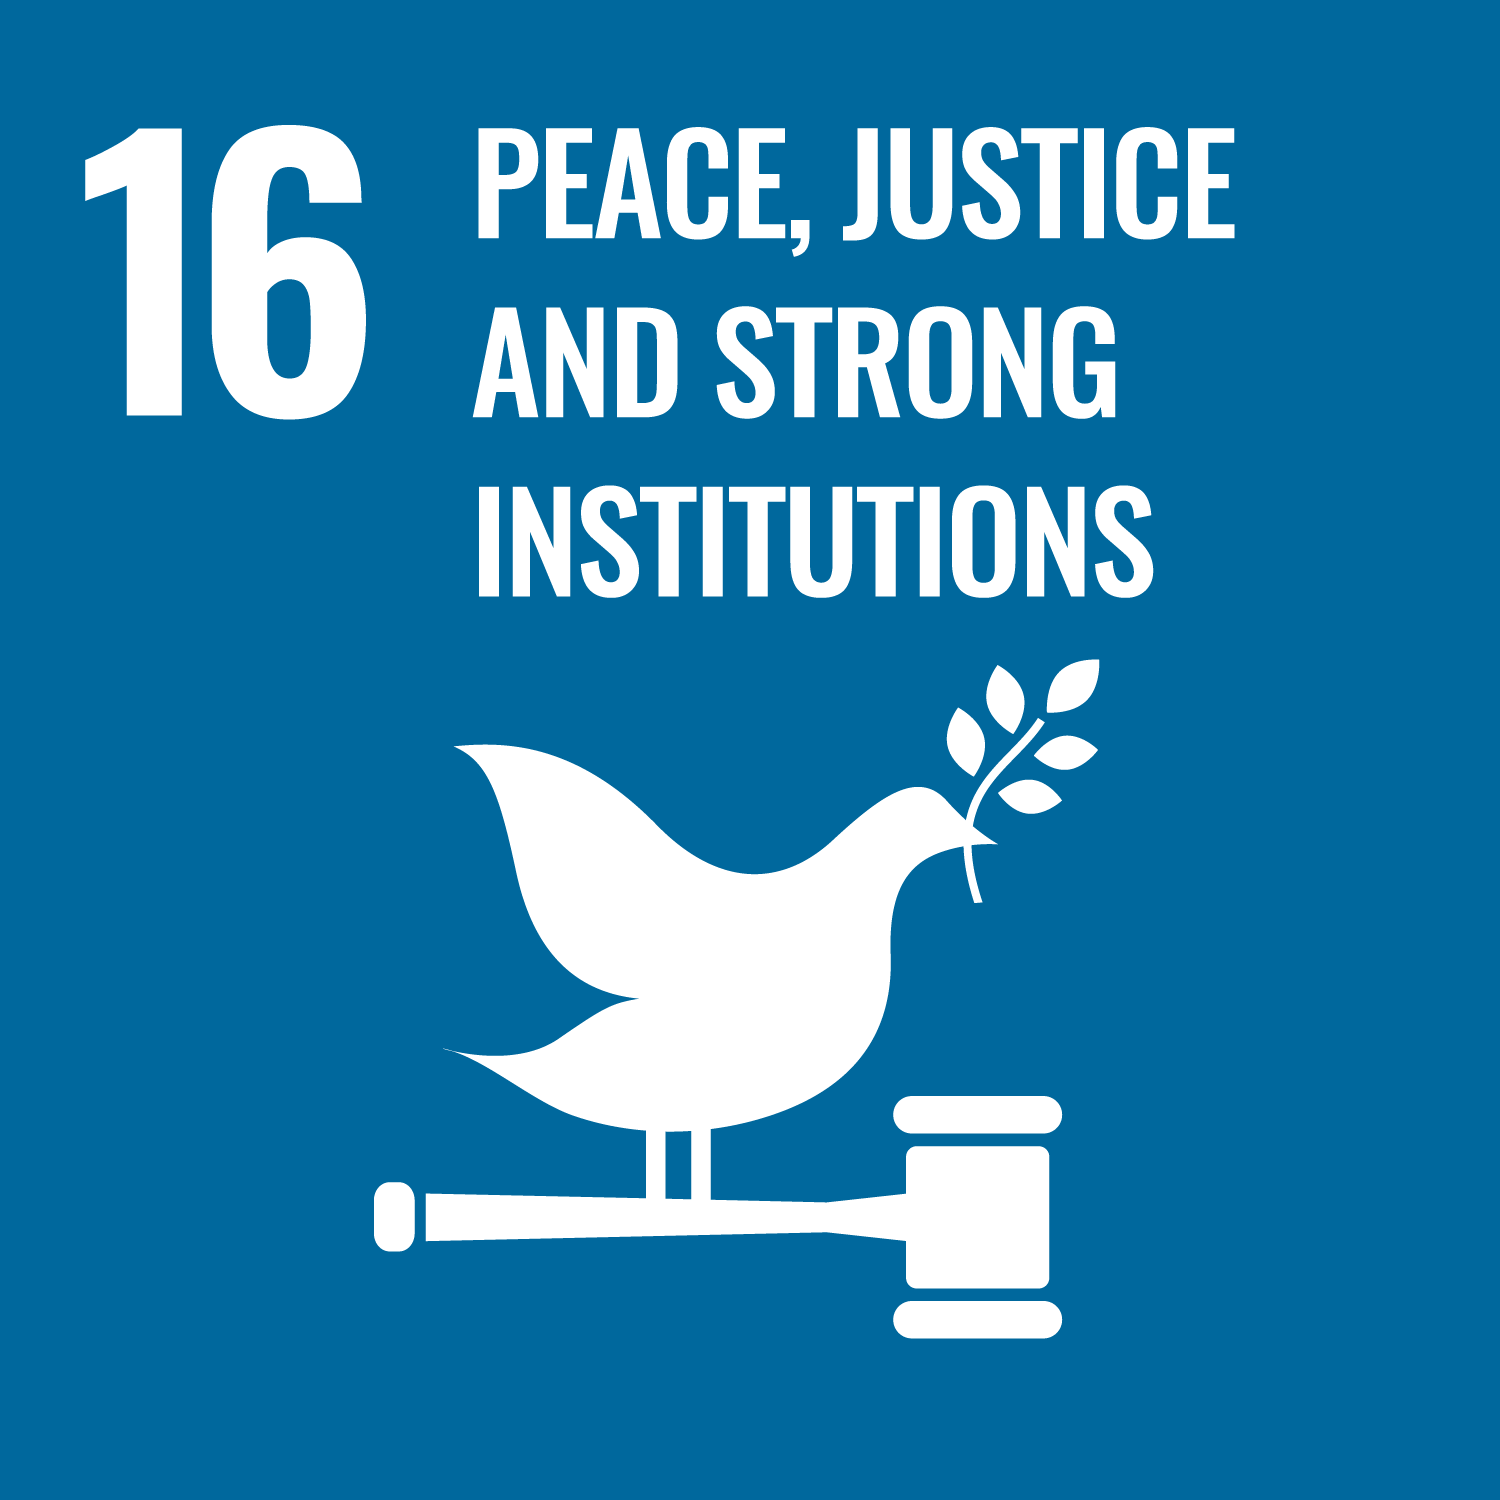 16 | PEACE, JUSTICE AND STRONG INSTITUTIONS